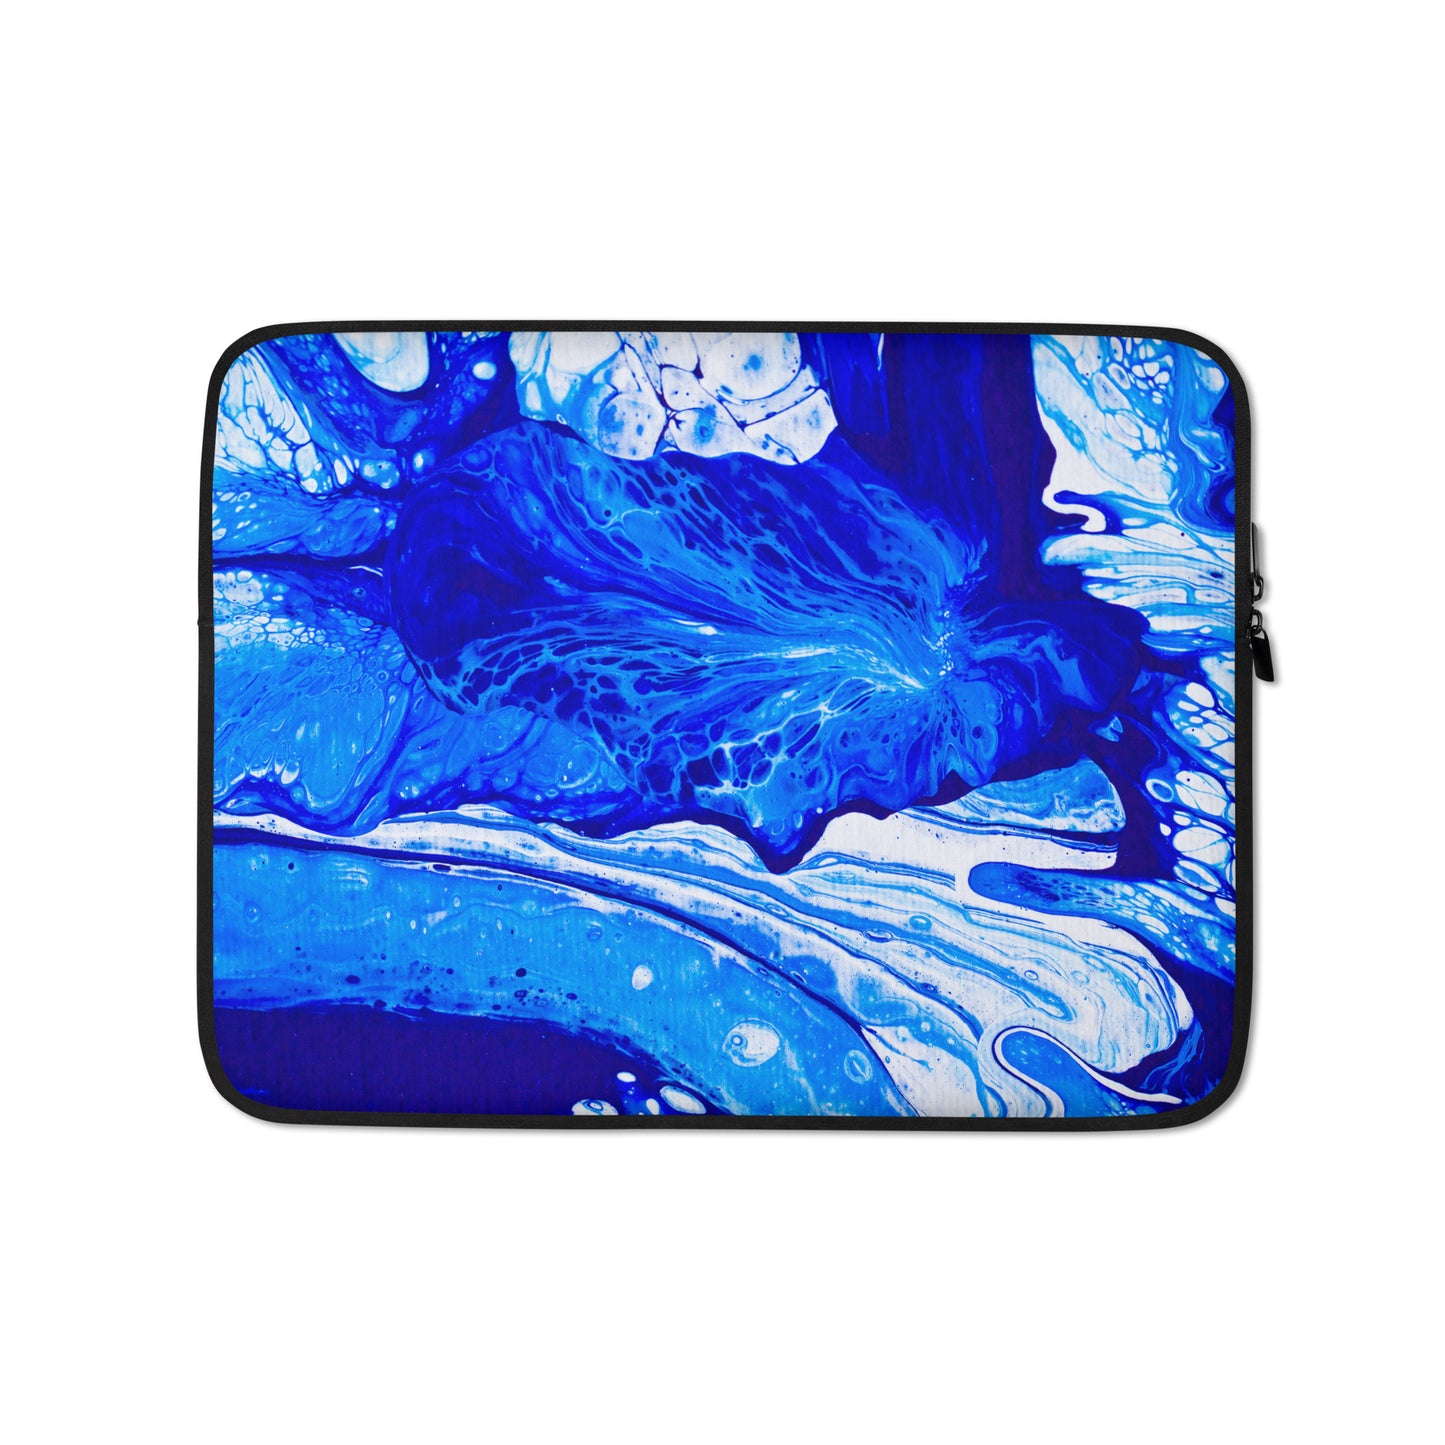 NightOwl Studio Padded Laptop Sleeve with Faux Fur Lining, 13 and 15 Inch Covers for Portable Computers and Large Tablets, Slim and Portable Neoprene for Work, Travel, or Gaming, Ms. Blue